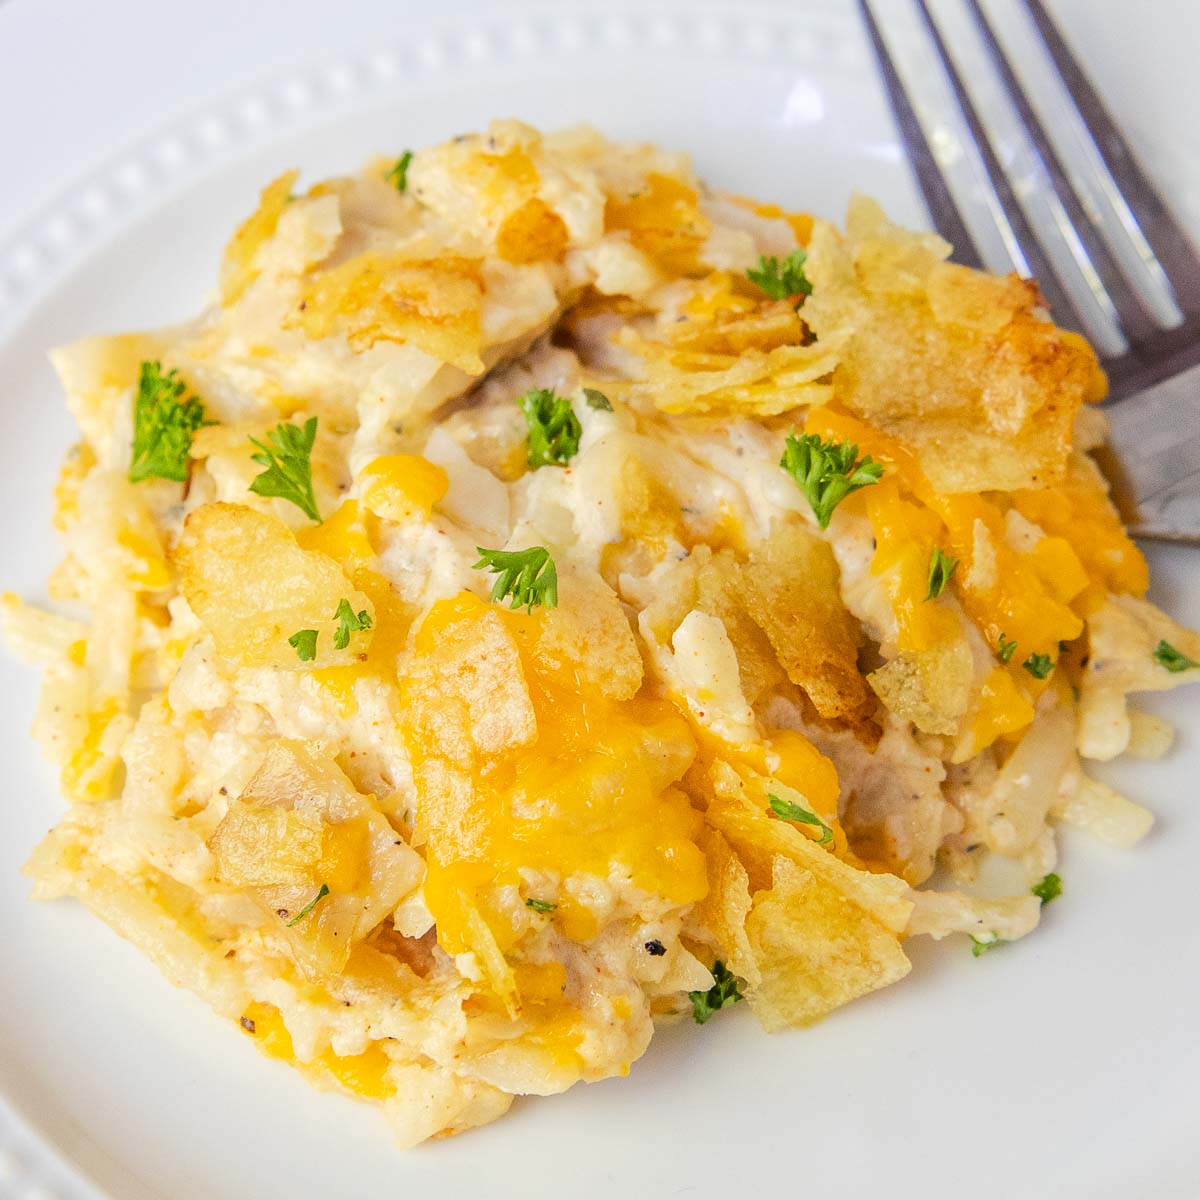 Chicken and hash brown casserole topped with crushed potato chips and cheese.